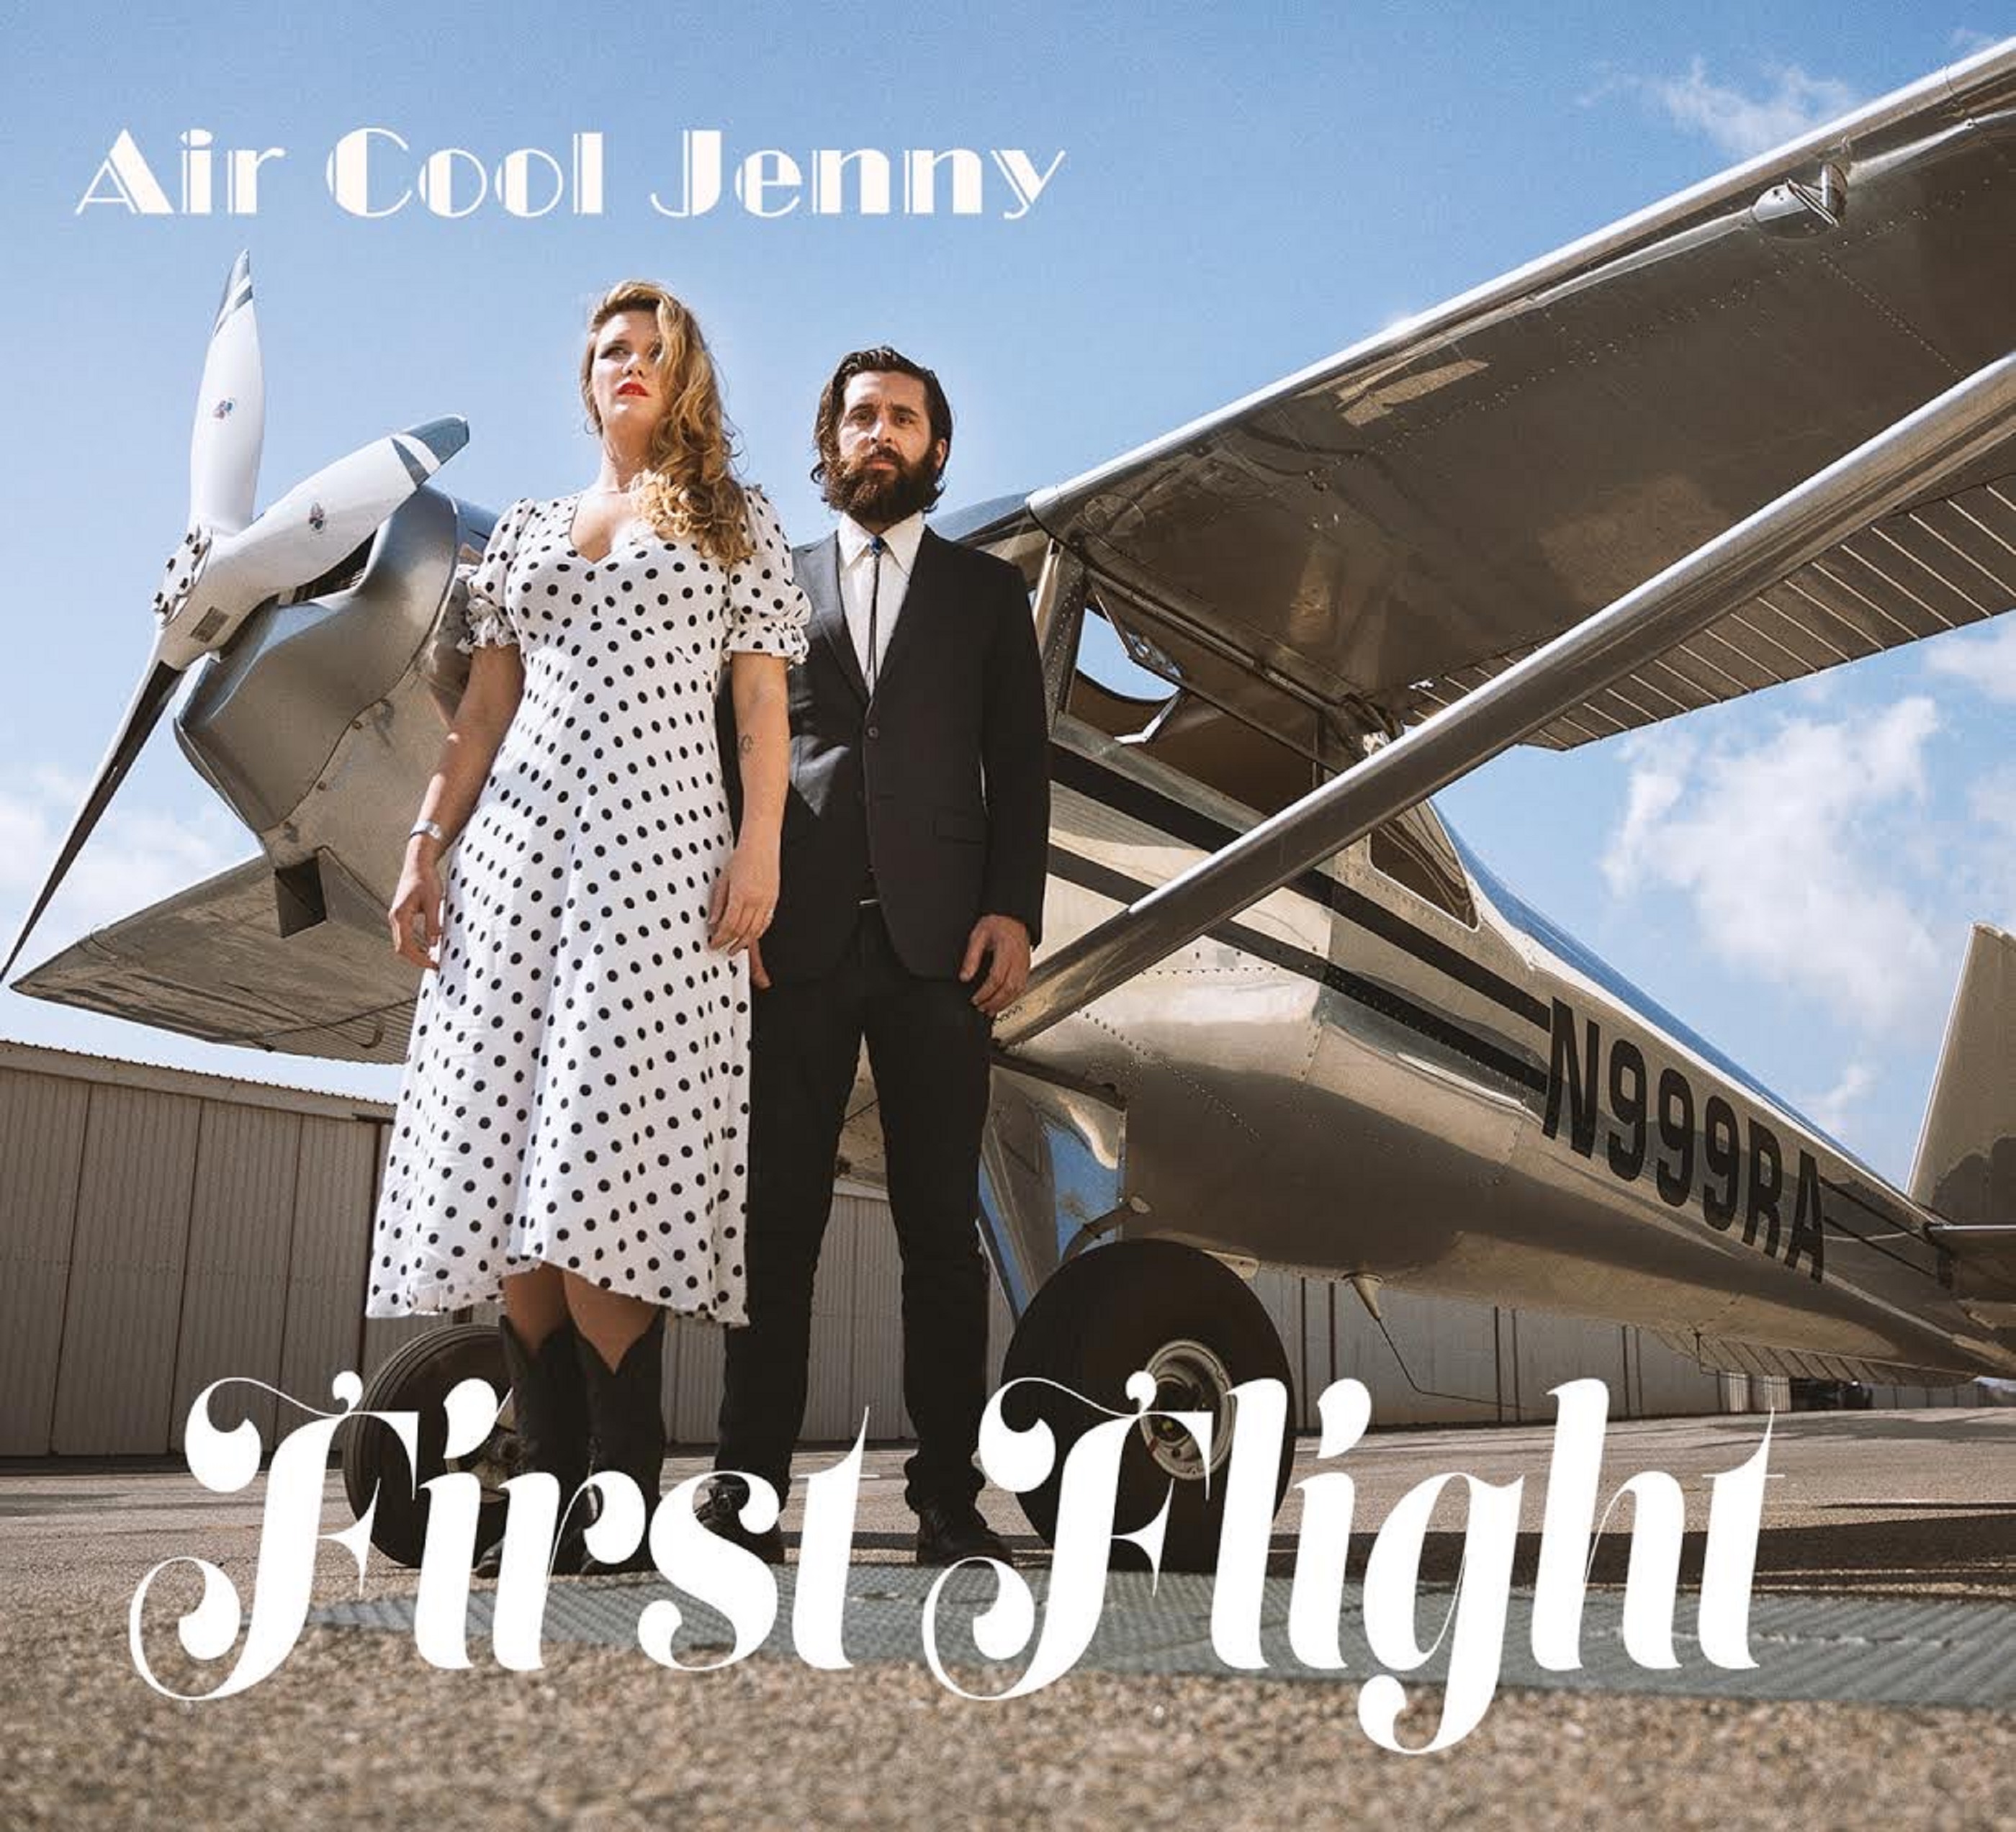 AIR COOL JENNY TO RELEASE FIRST FLIGHT